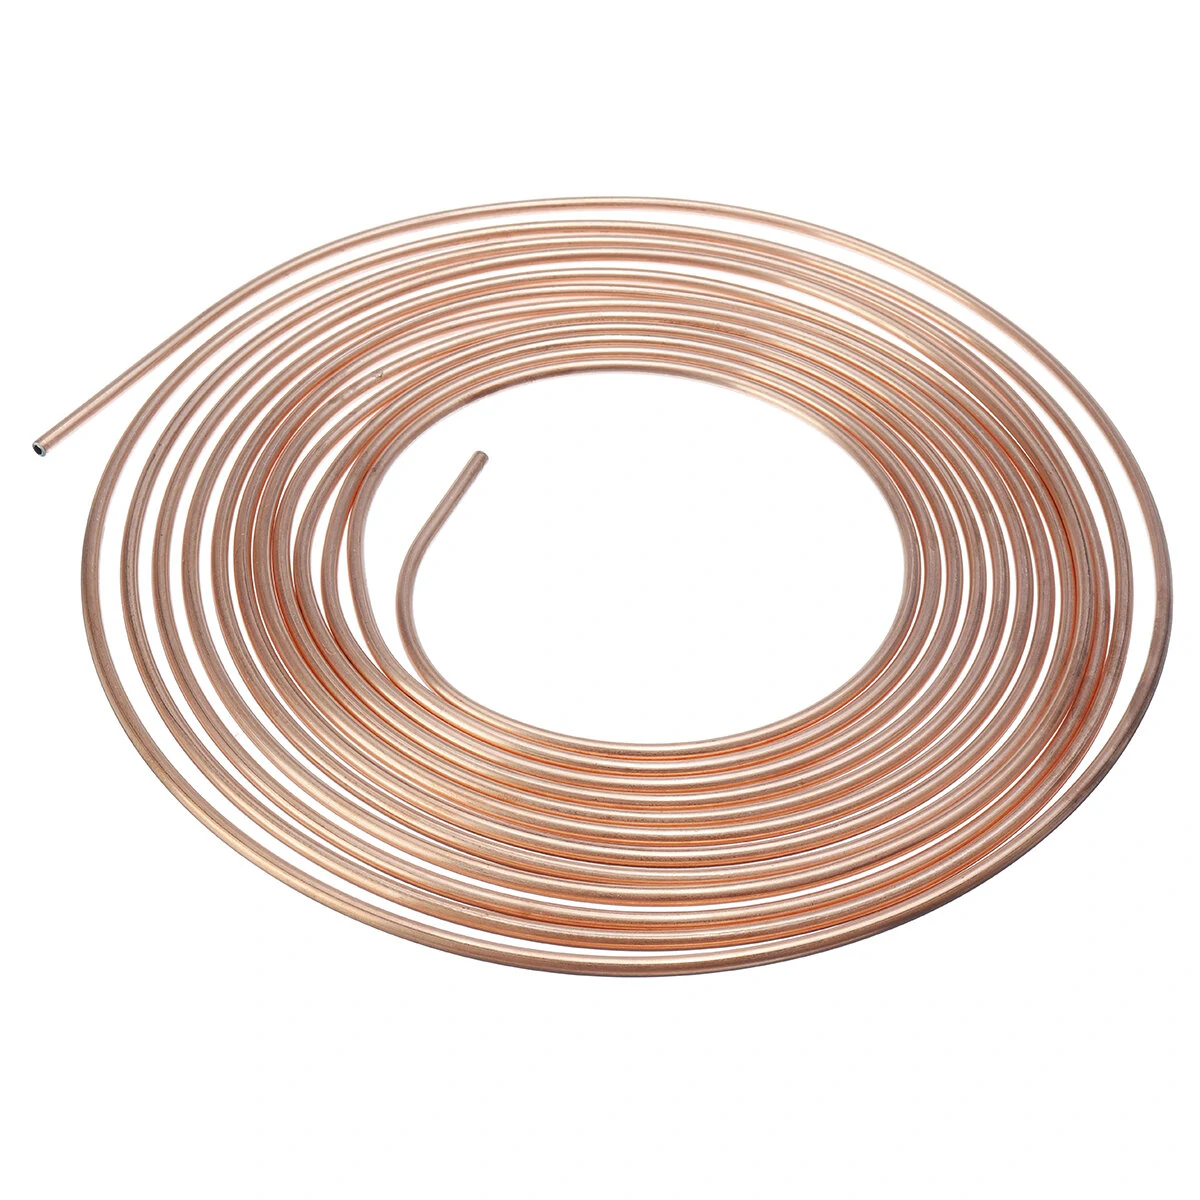 25ft Roll Tube Coil of 3 16 OD Copper Brake Pipe Hose Line Piping Joint Union